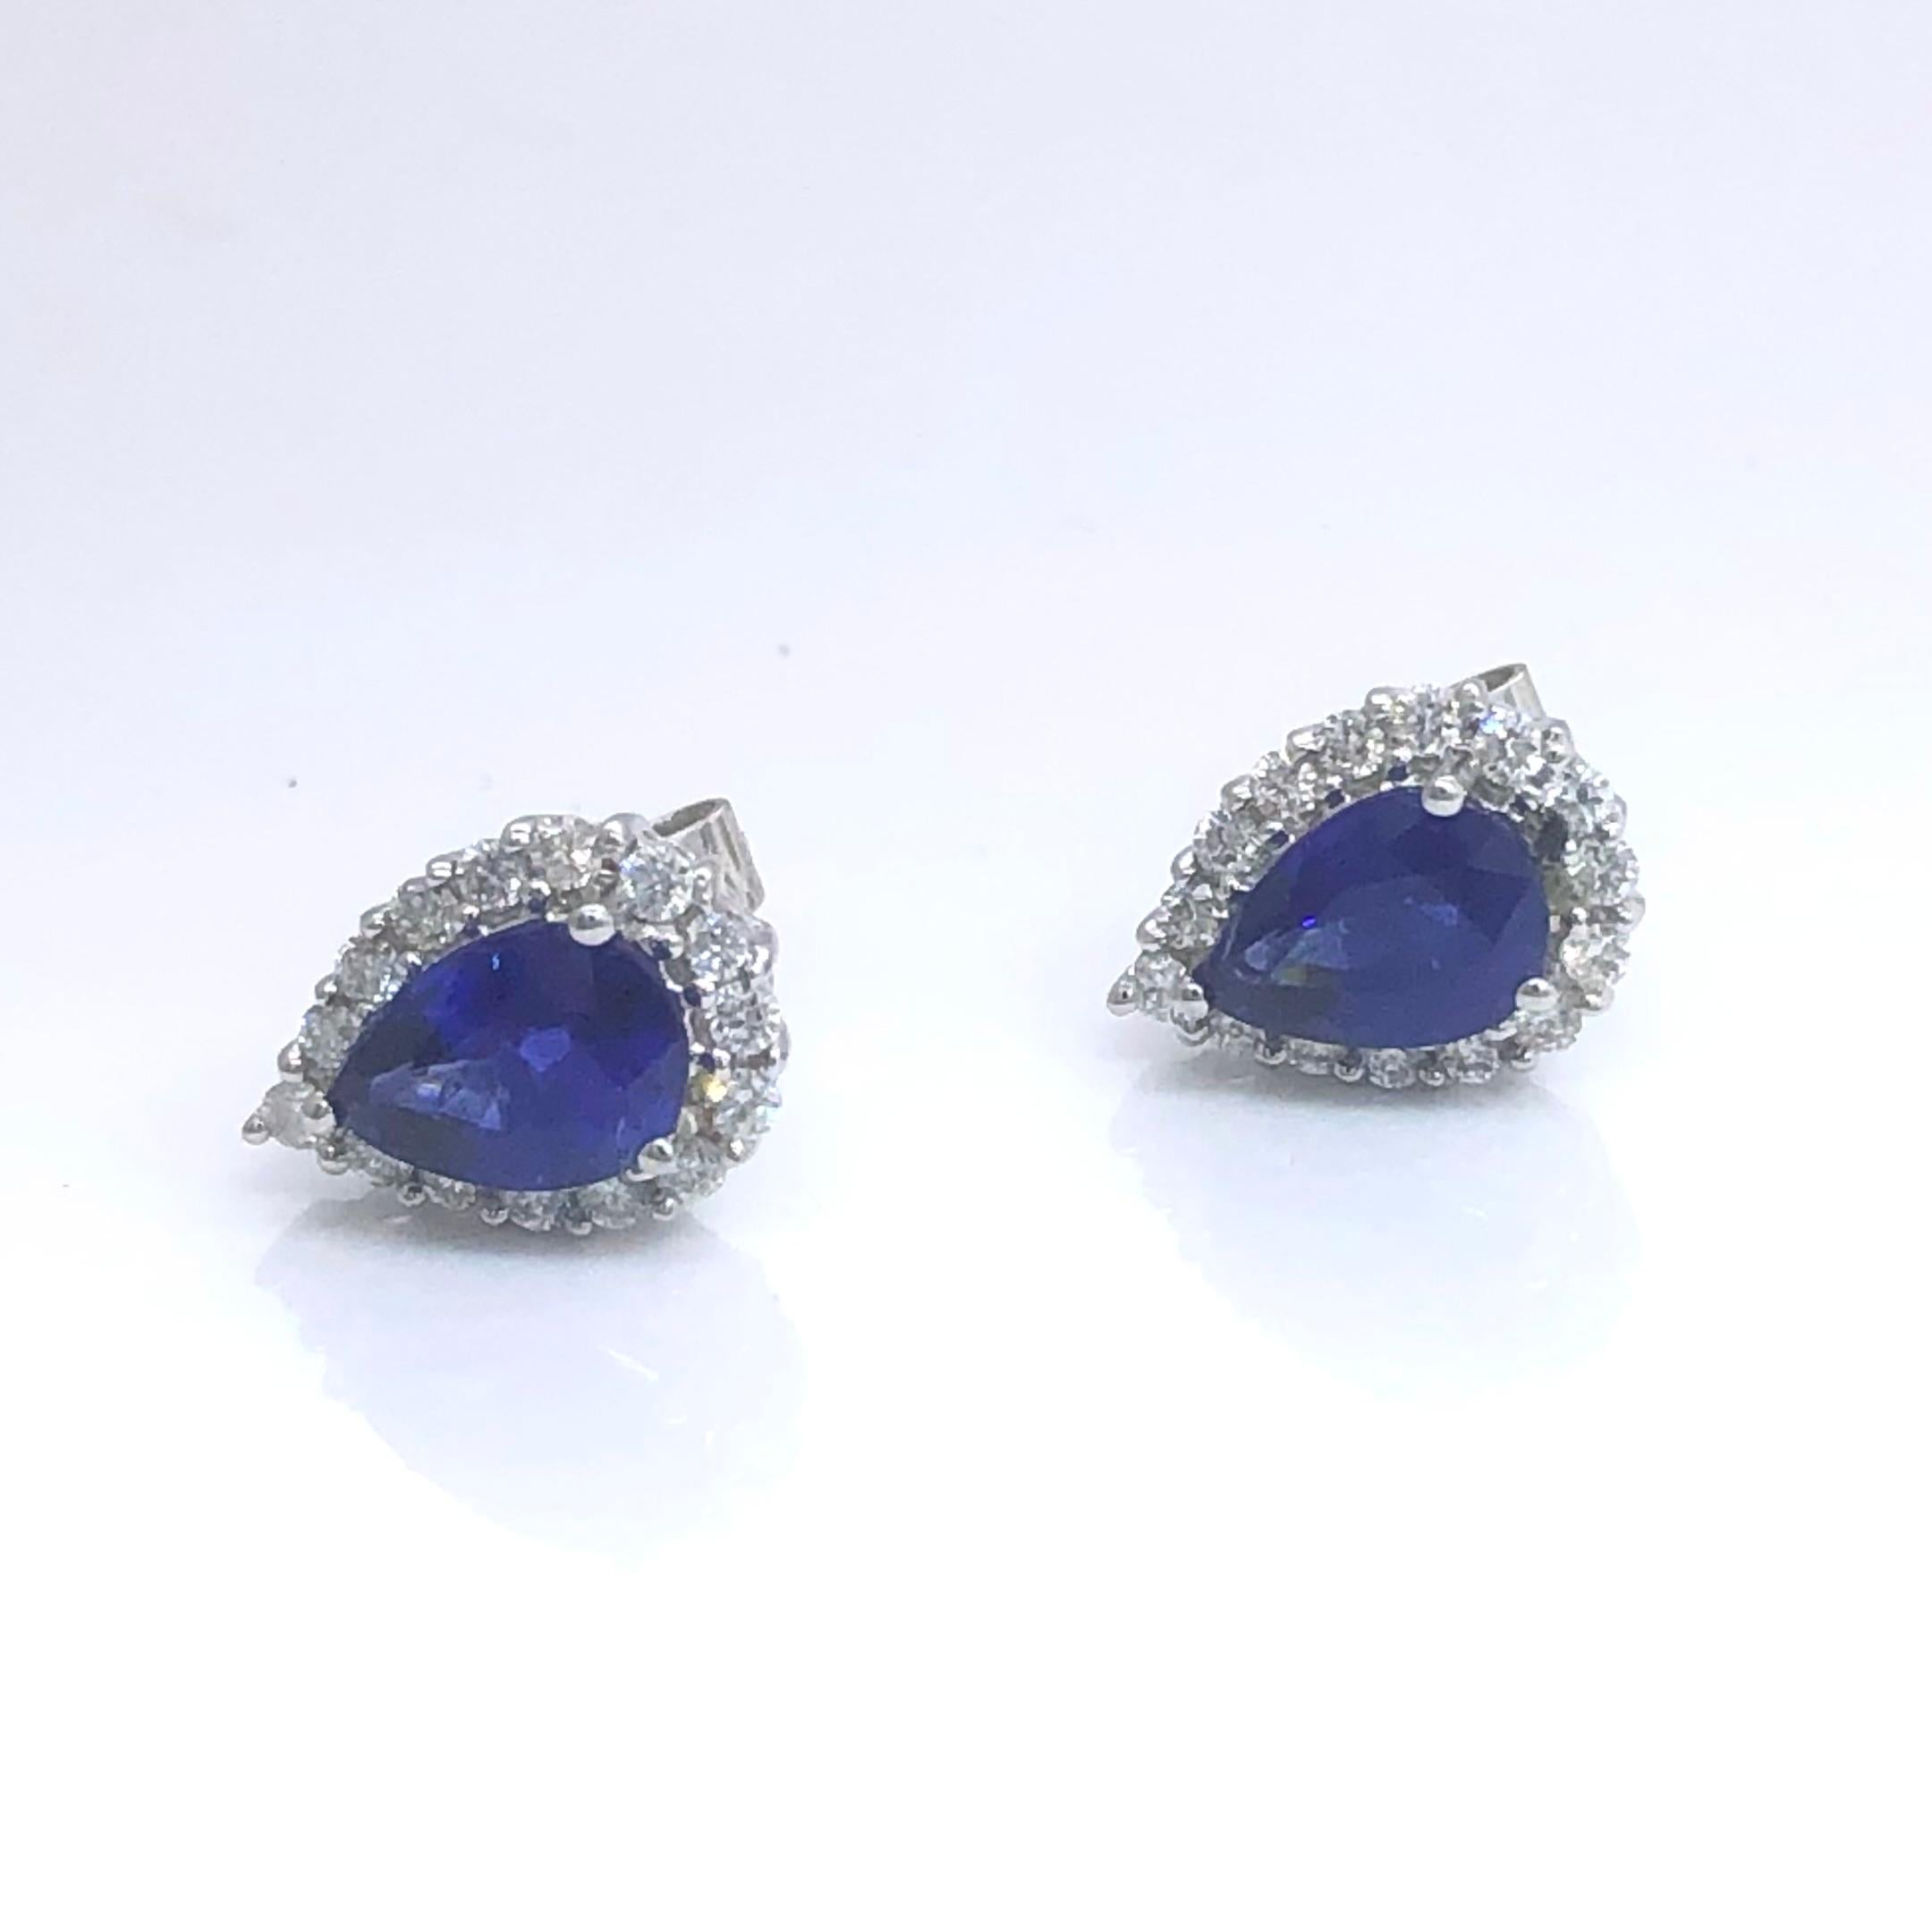 Belle Époque White gold earrings with pear shape Ceylon sapphires surrounded by diamonds For Sale